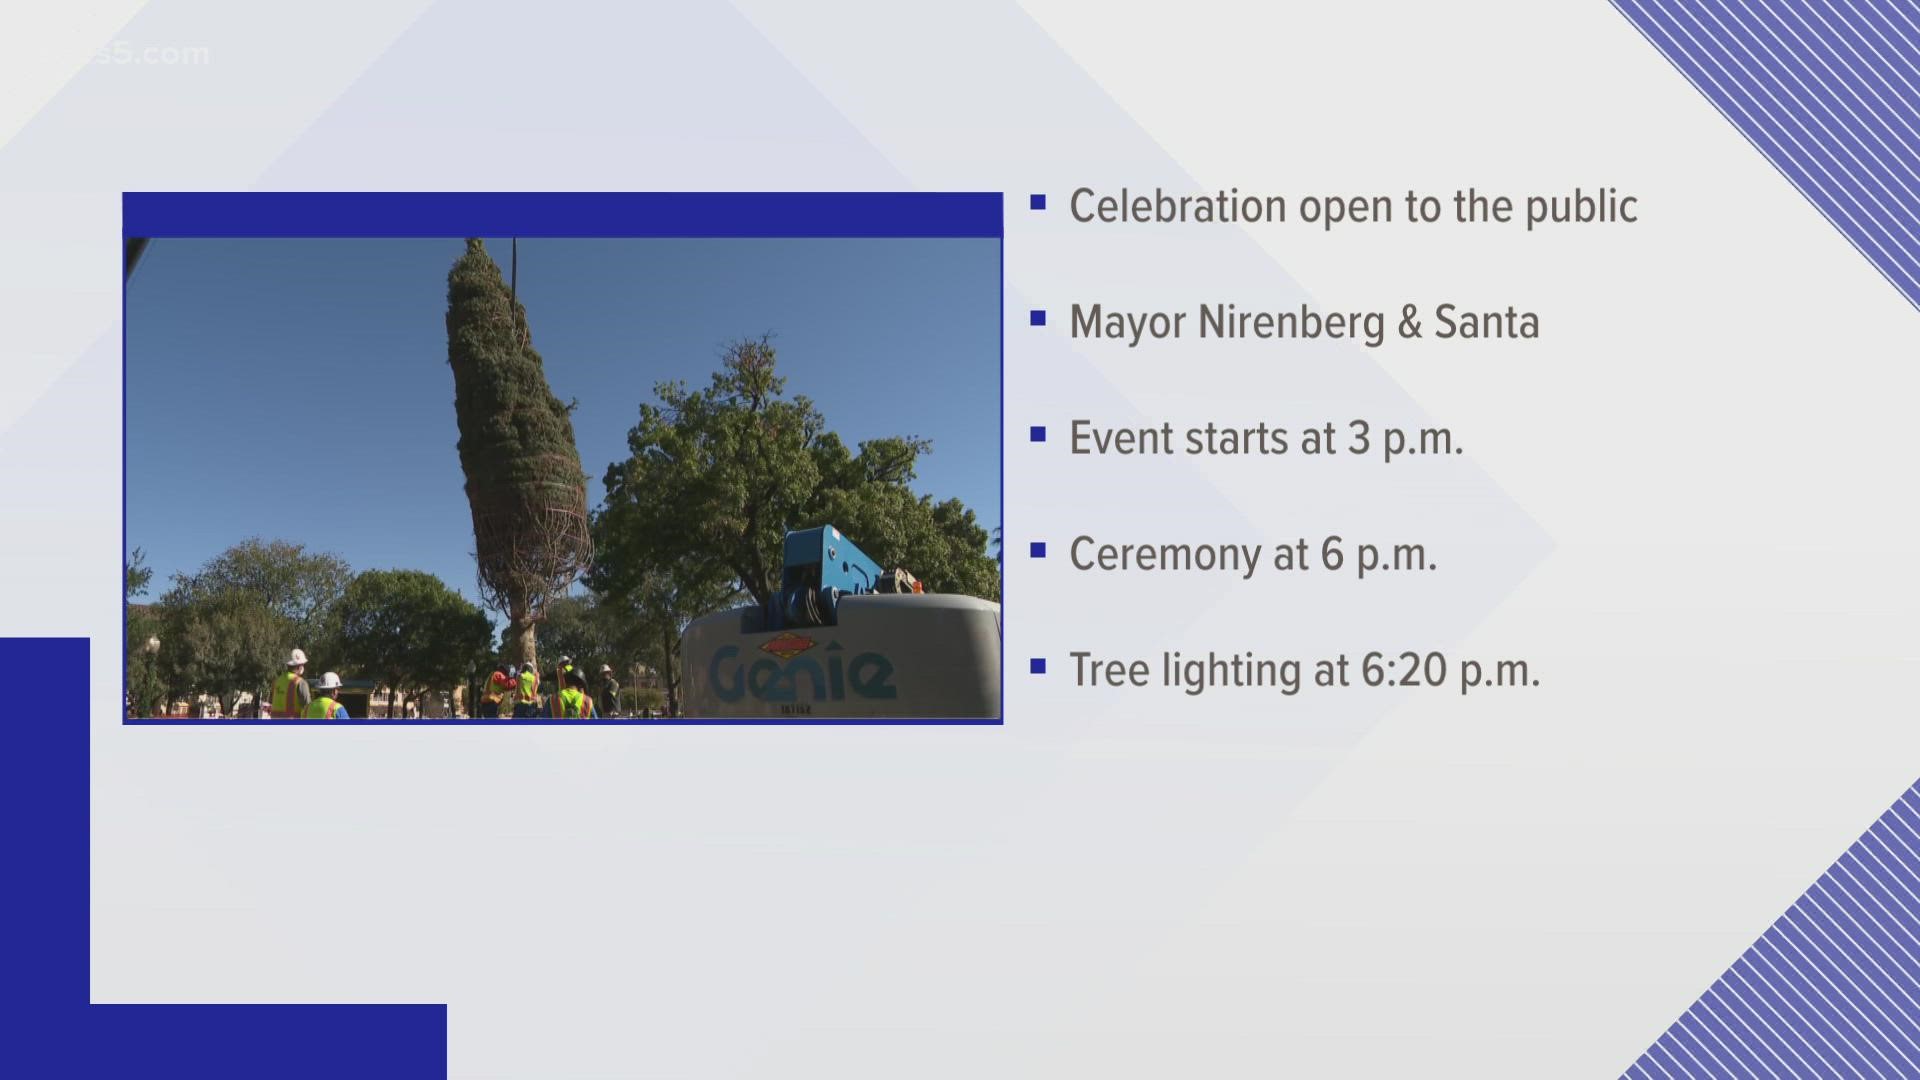 The celebration will be taking place at Travis Park. The event starts at 3 p.m. and the ceremony at 6 p.m.